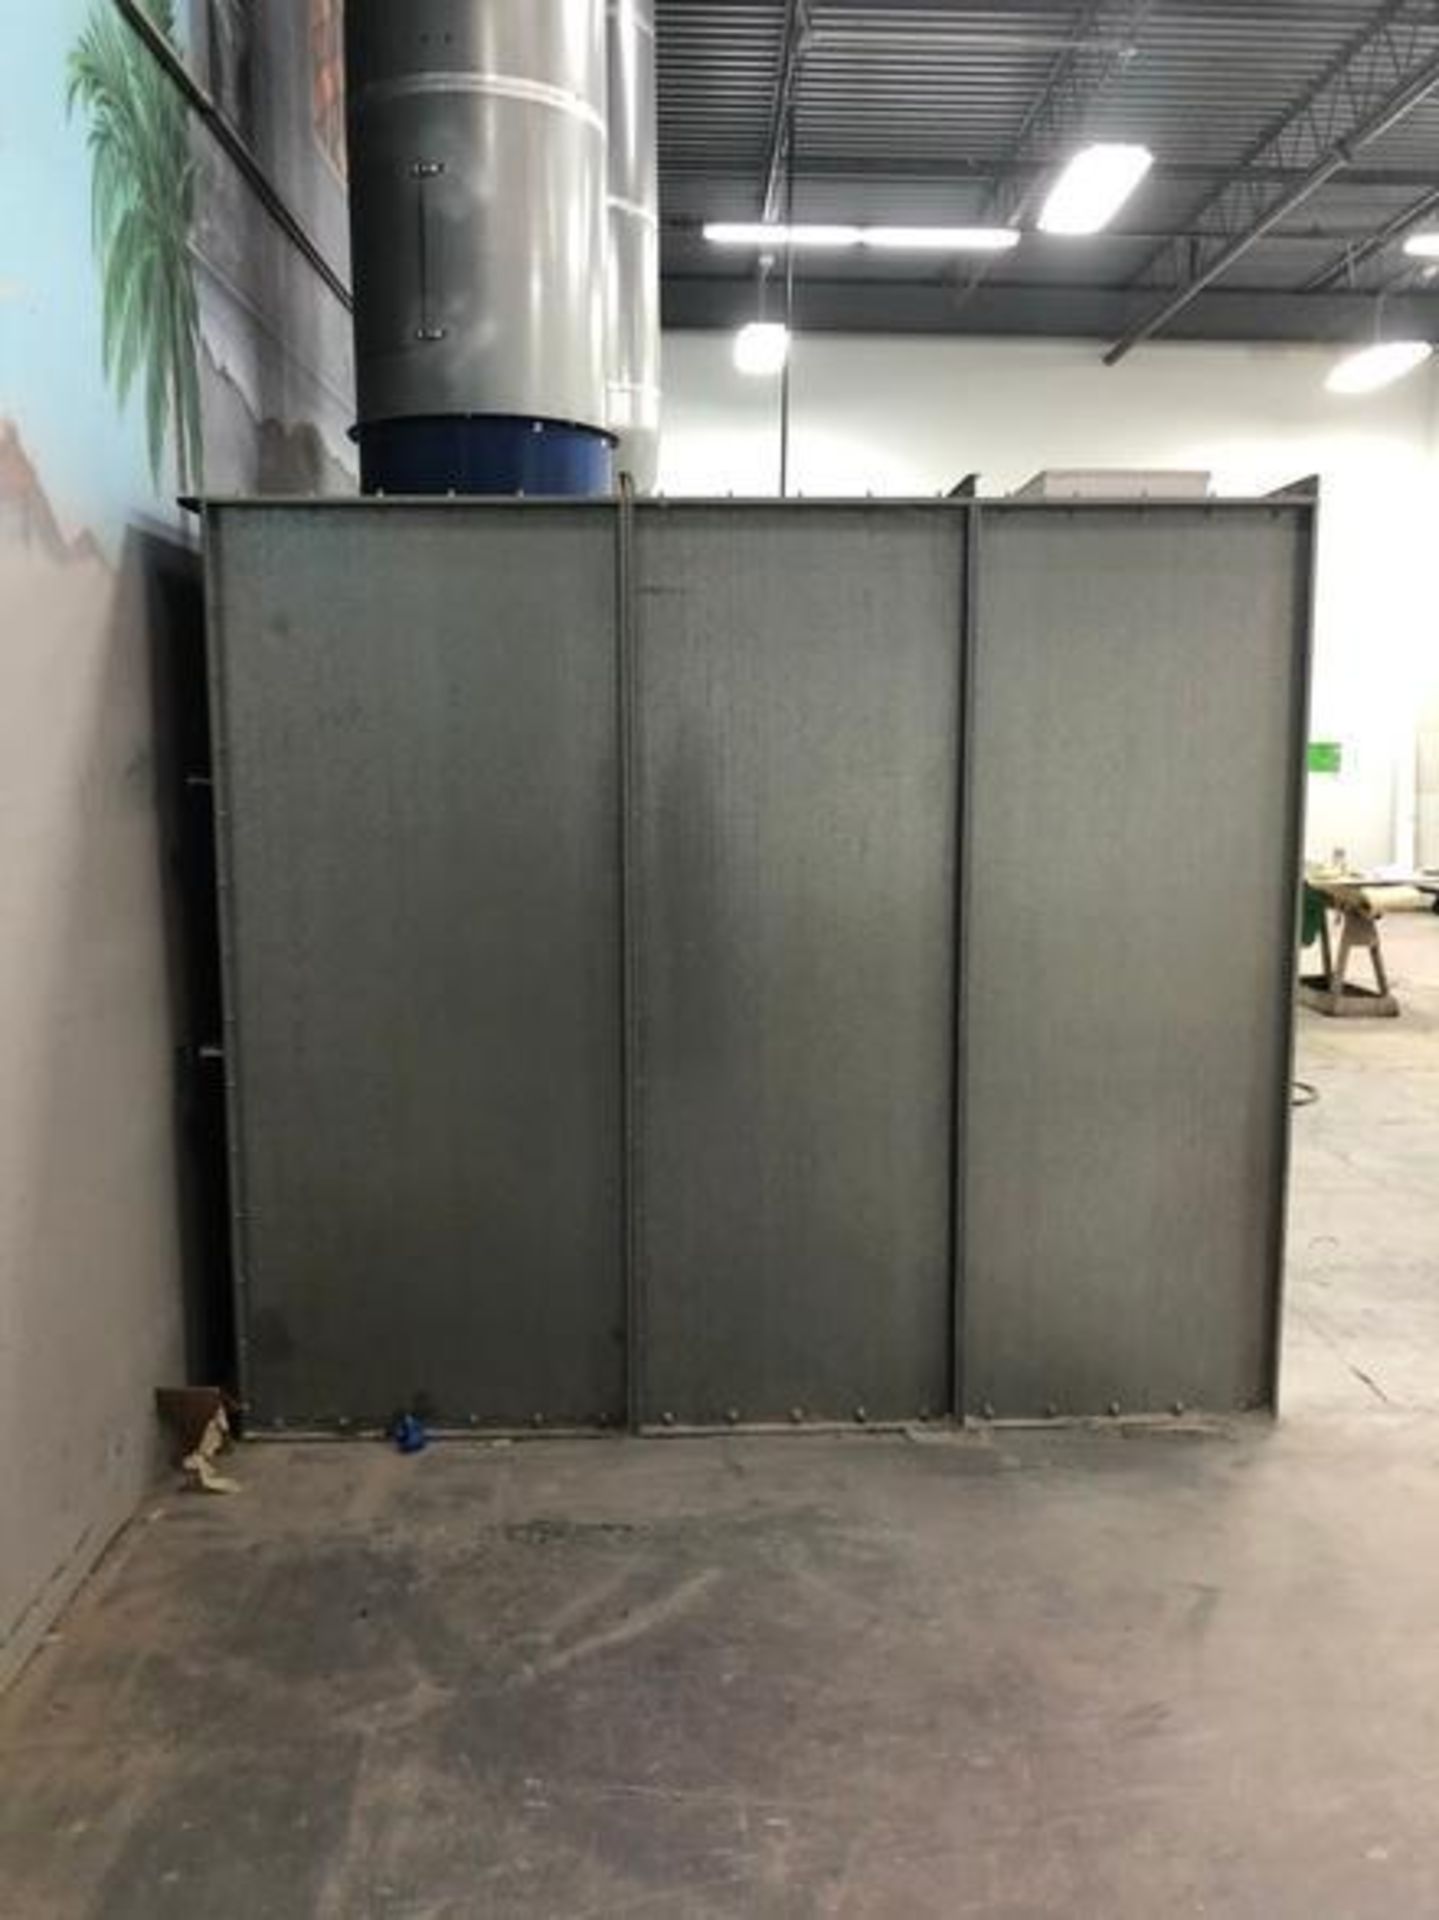 Dwyer Filter Back Paint Spray Booth, 6Ft. x 7Ft. x 6Ft. w/Exhaust Stack Kit (No Duct Past the First - Image 3 of 11